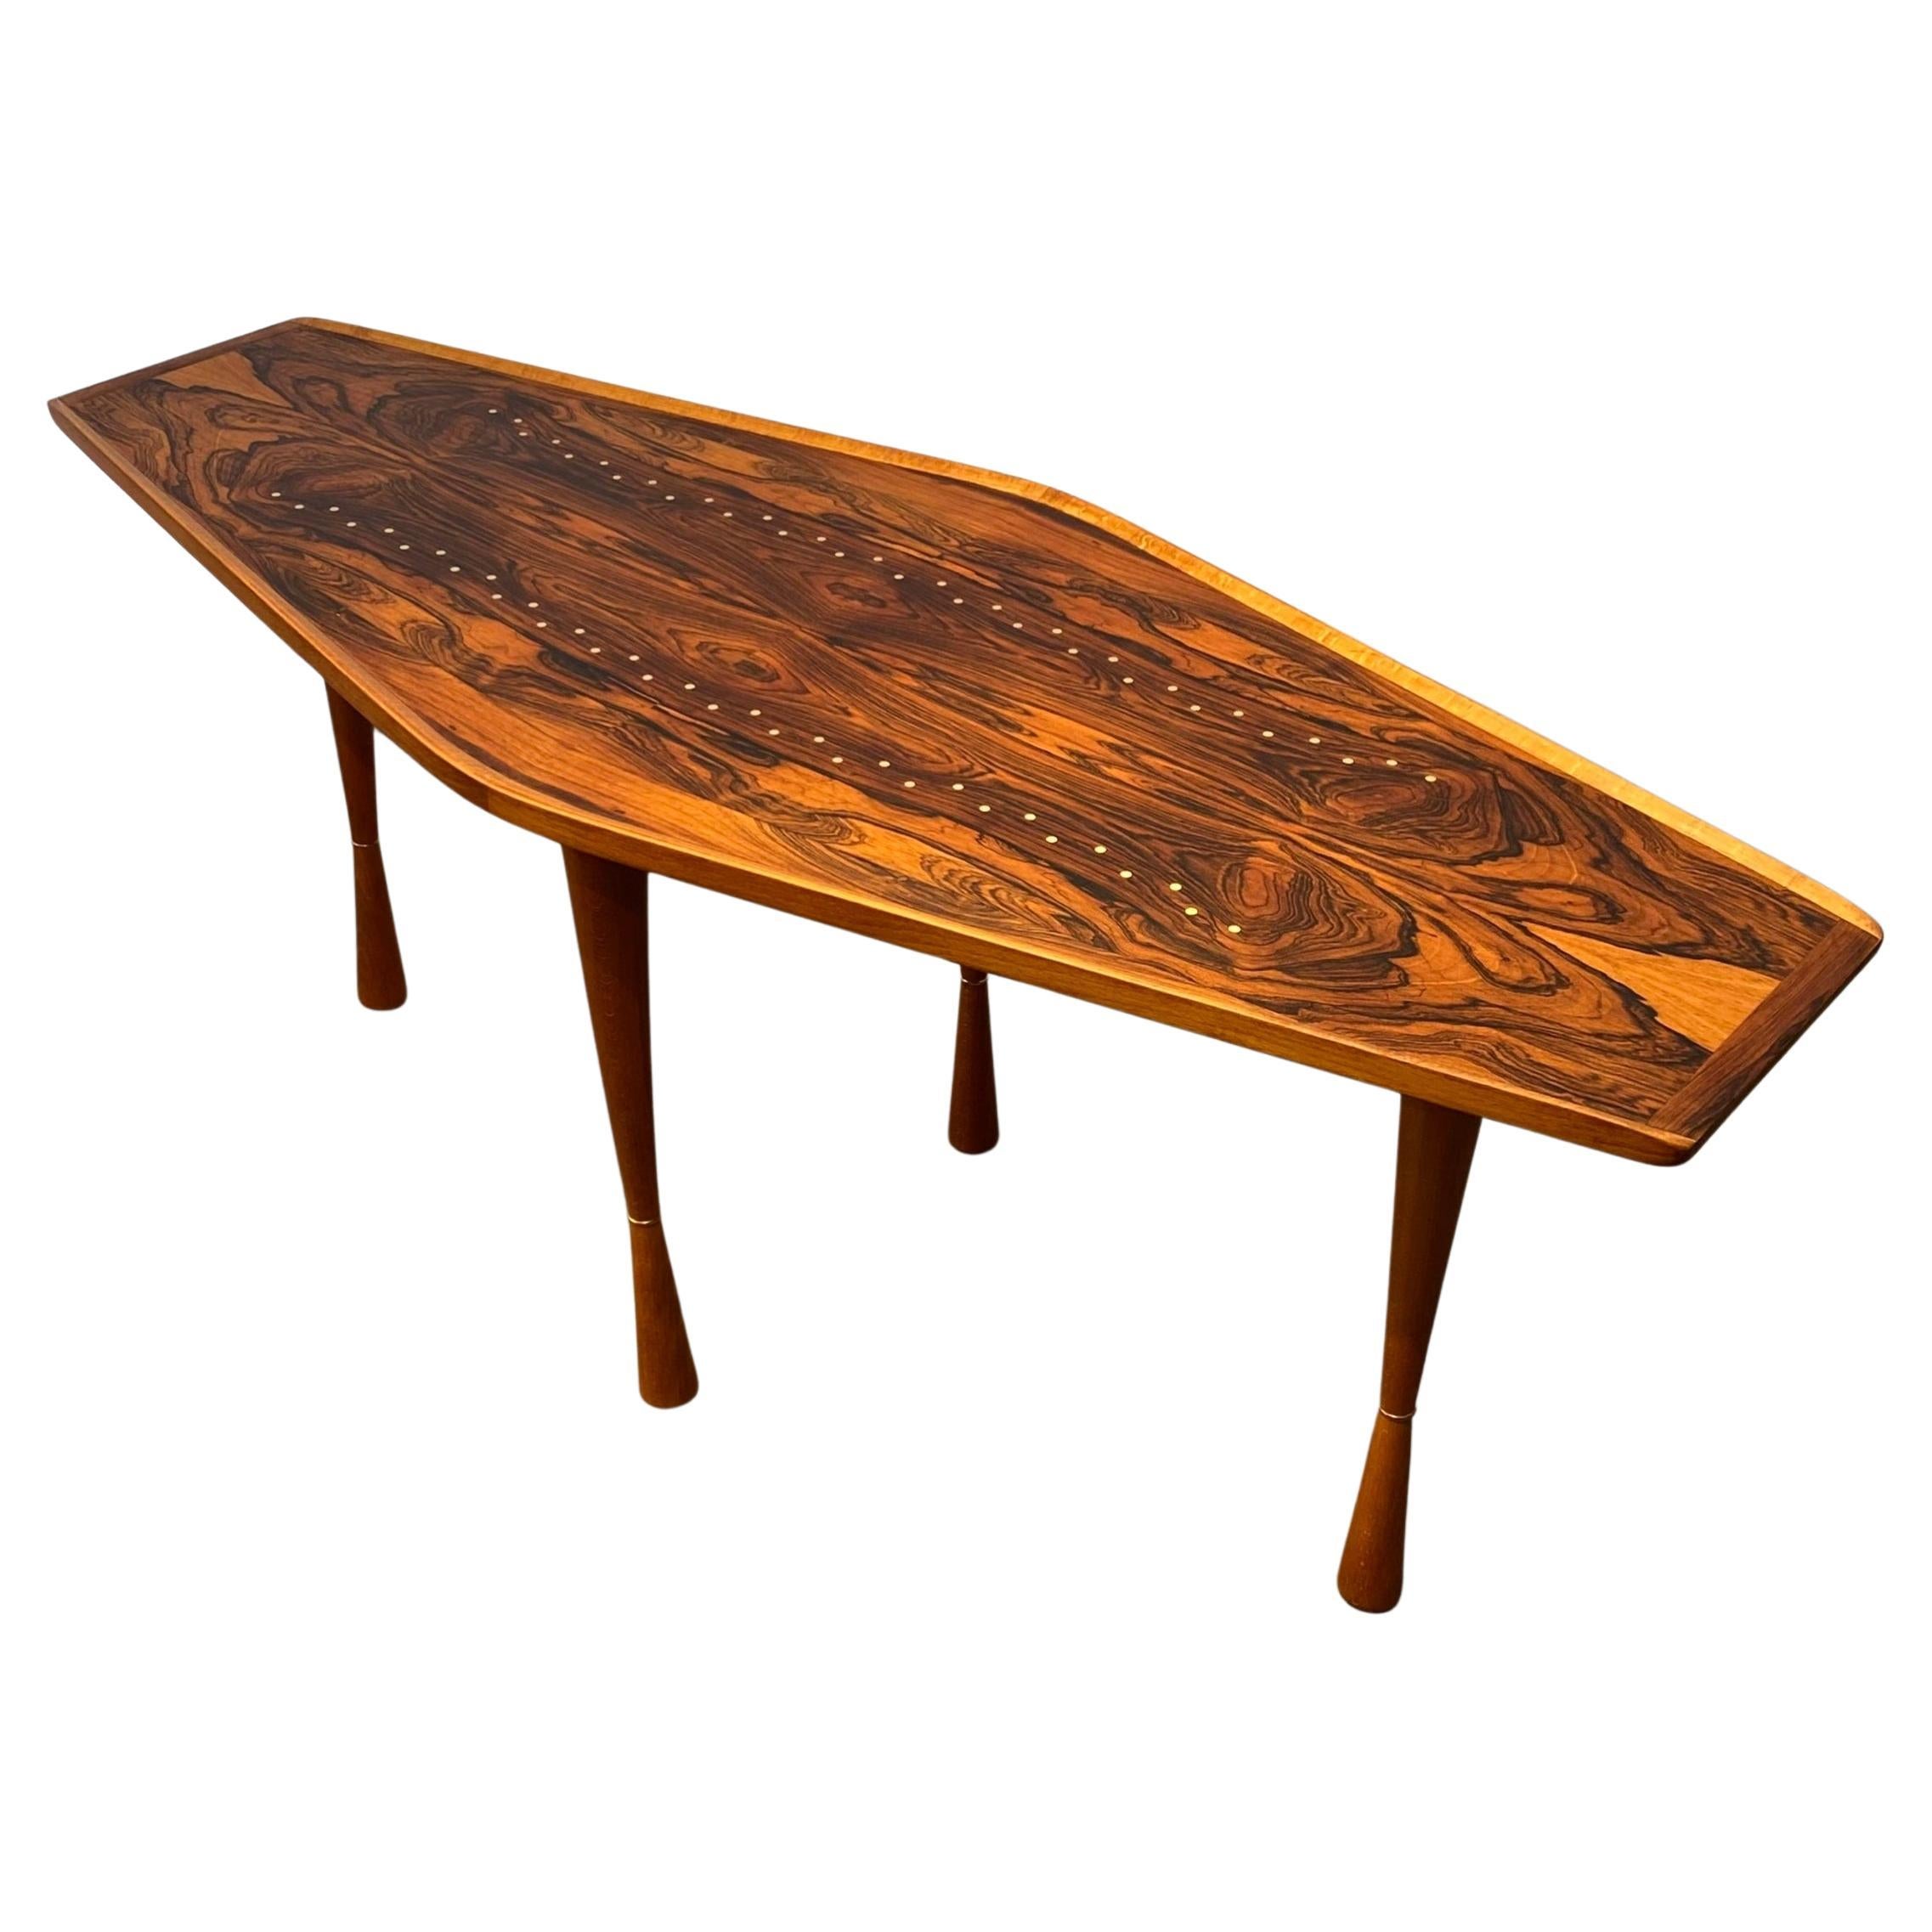 Swedish Modern coffee table with brass inlays, Sweden, 1940s For Sale